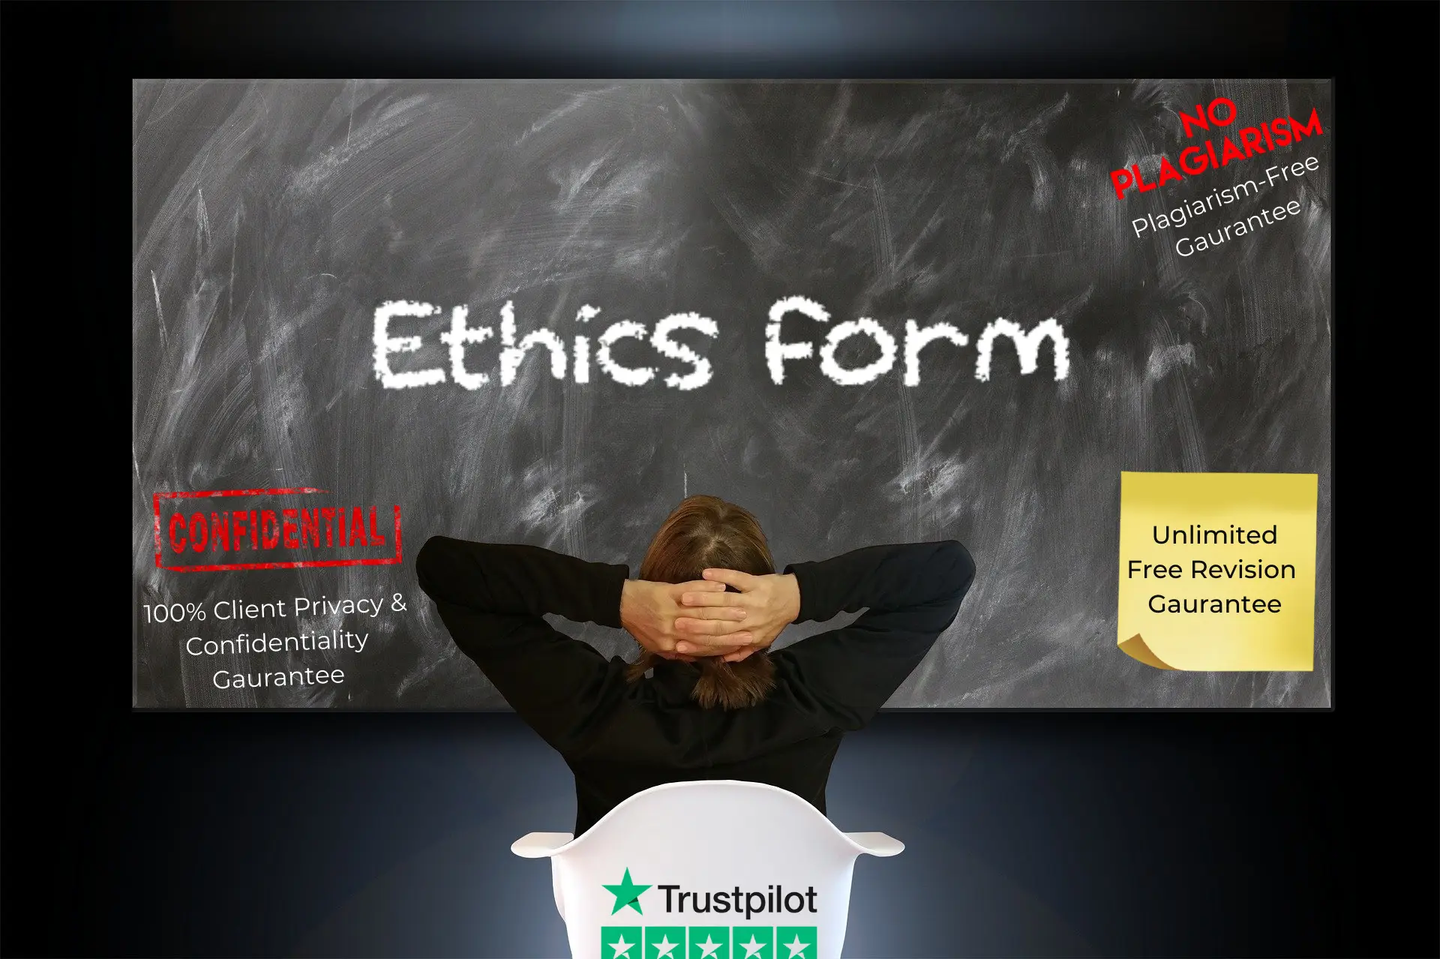 Tell us about your ethics form - Grammarholic